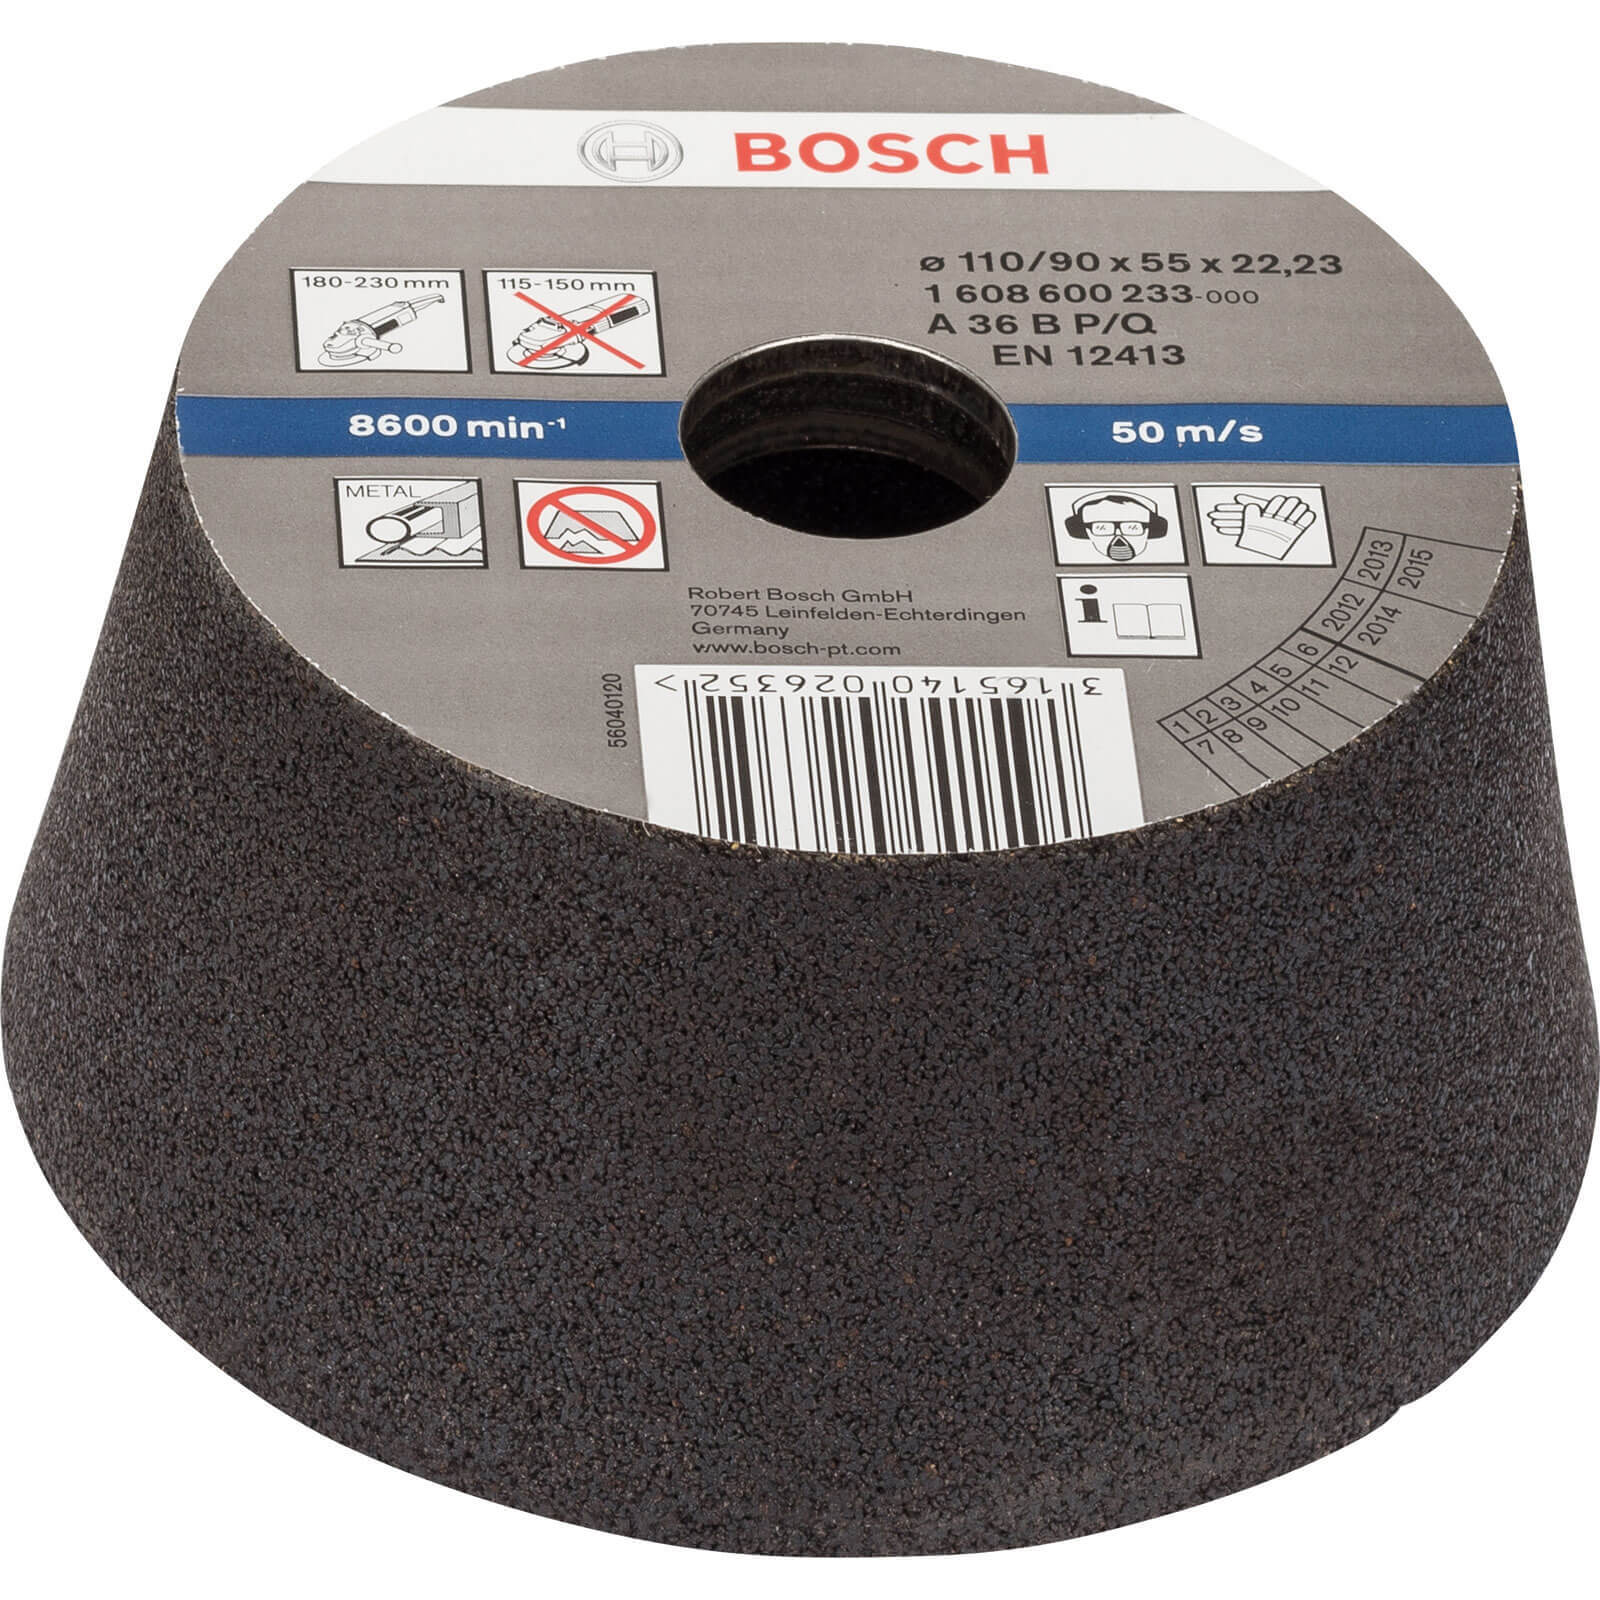 Image of Bosch Conical Abrasive Cup Wheel For Metal 110mm 36g